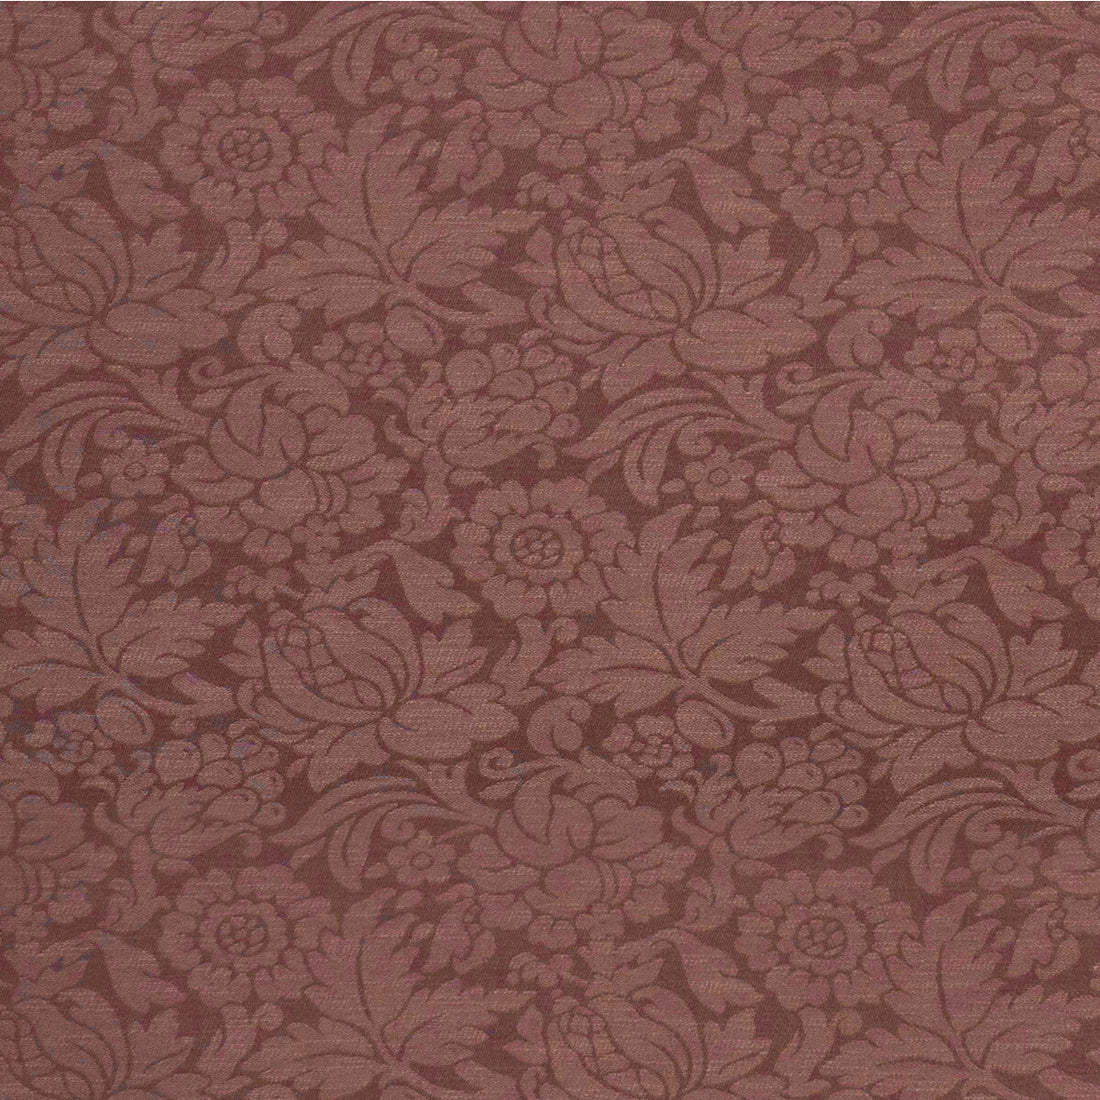 Shabby Damask fabric in rose color - pattern 36870.12.0 - by Kravet Couture in the Atelier Weaves collection